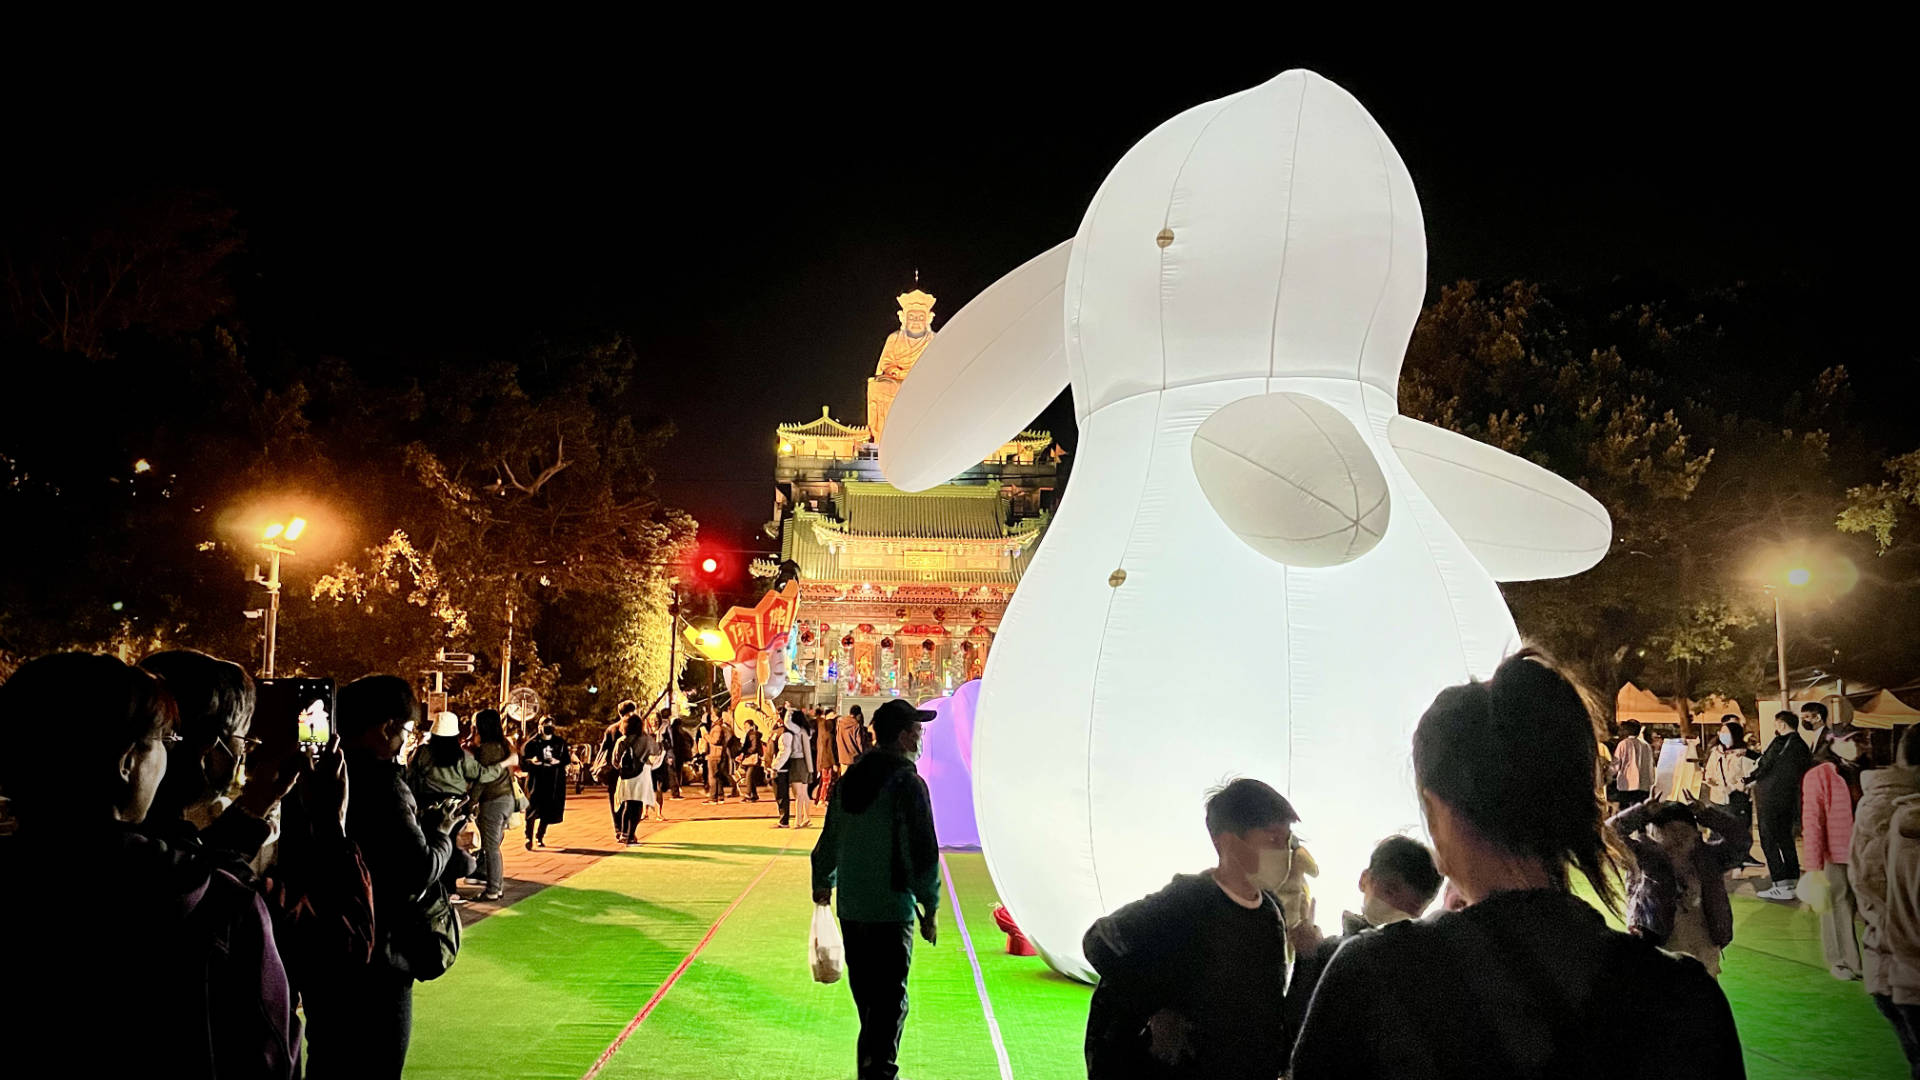 A large inflatable rabbit outside a temple.